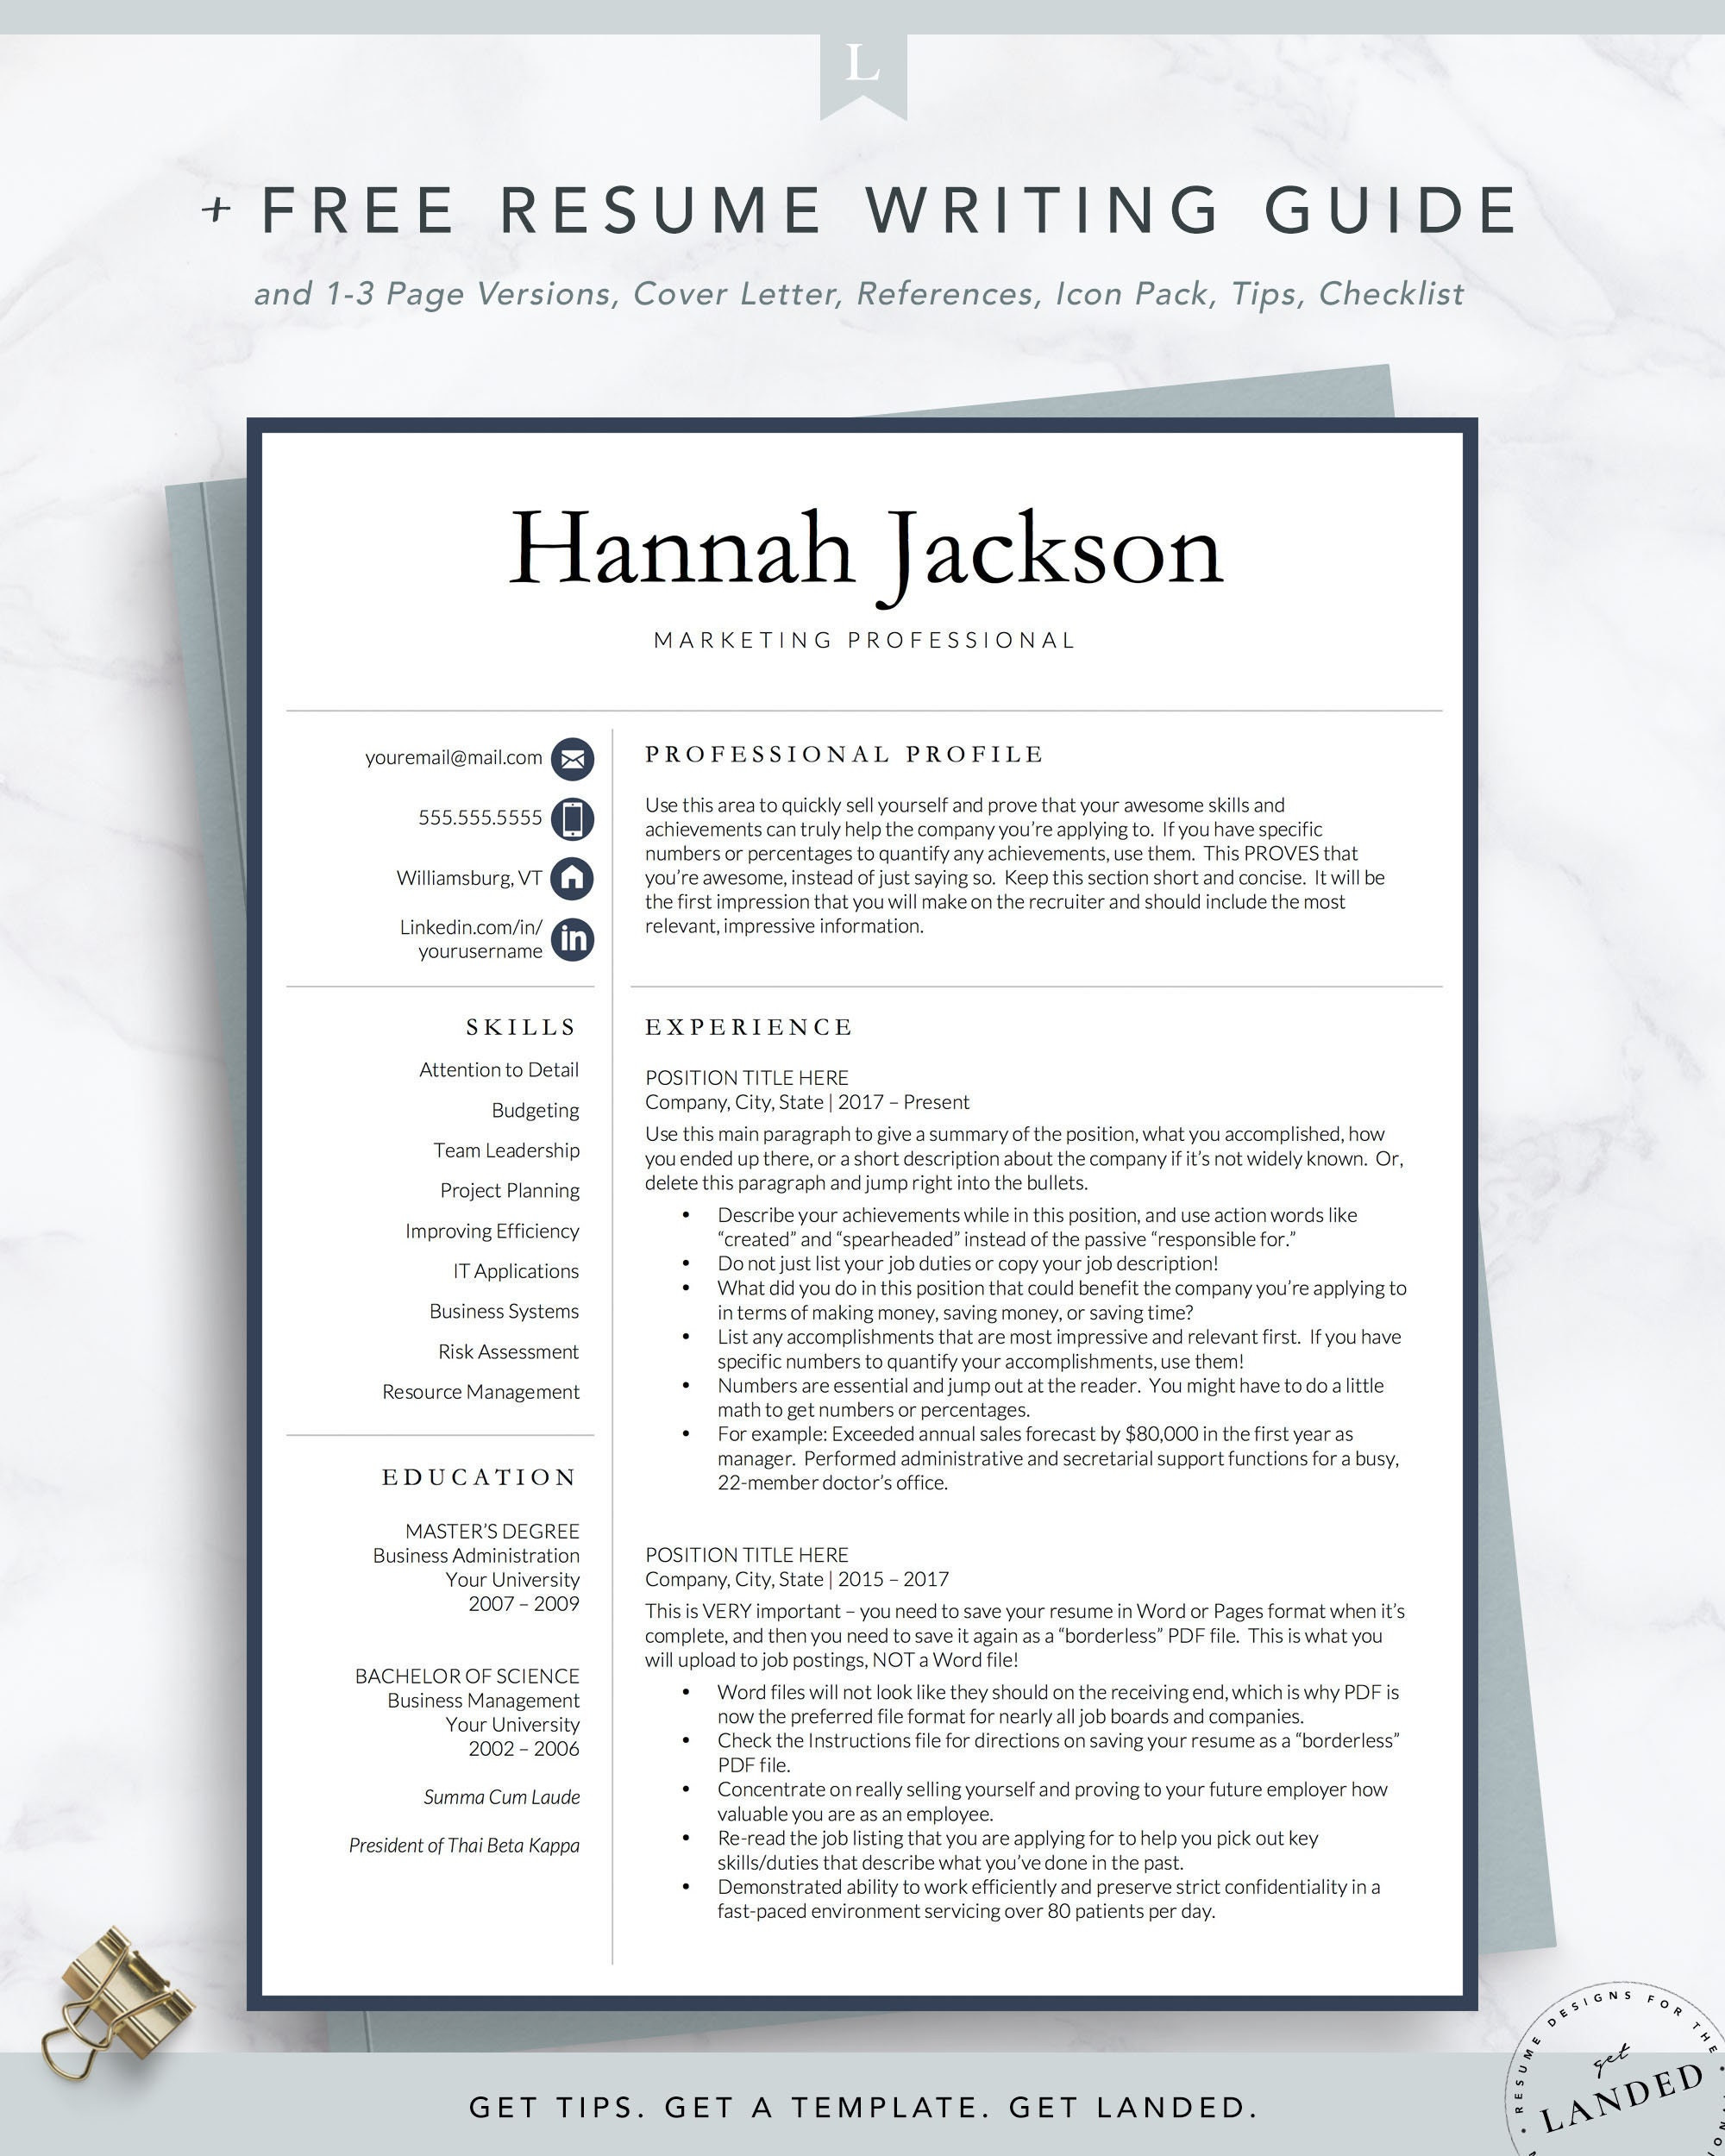 Sample Resume for Accountant In School Accountant Resume Template for Word and Pages Professional – Etsy.de